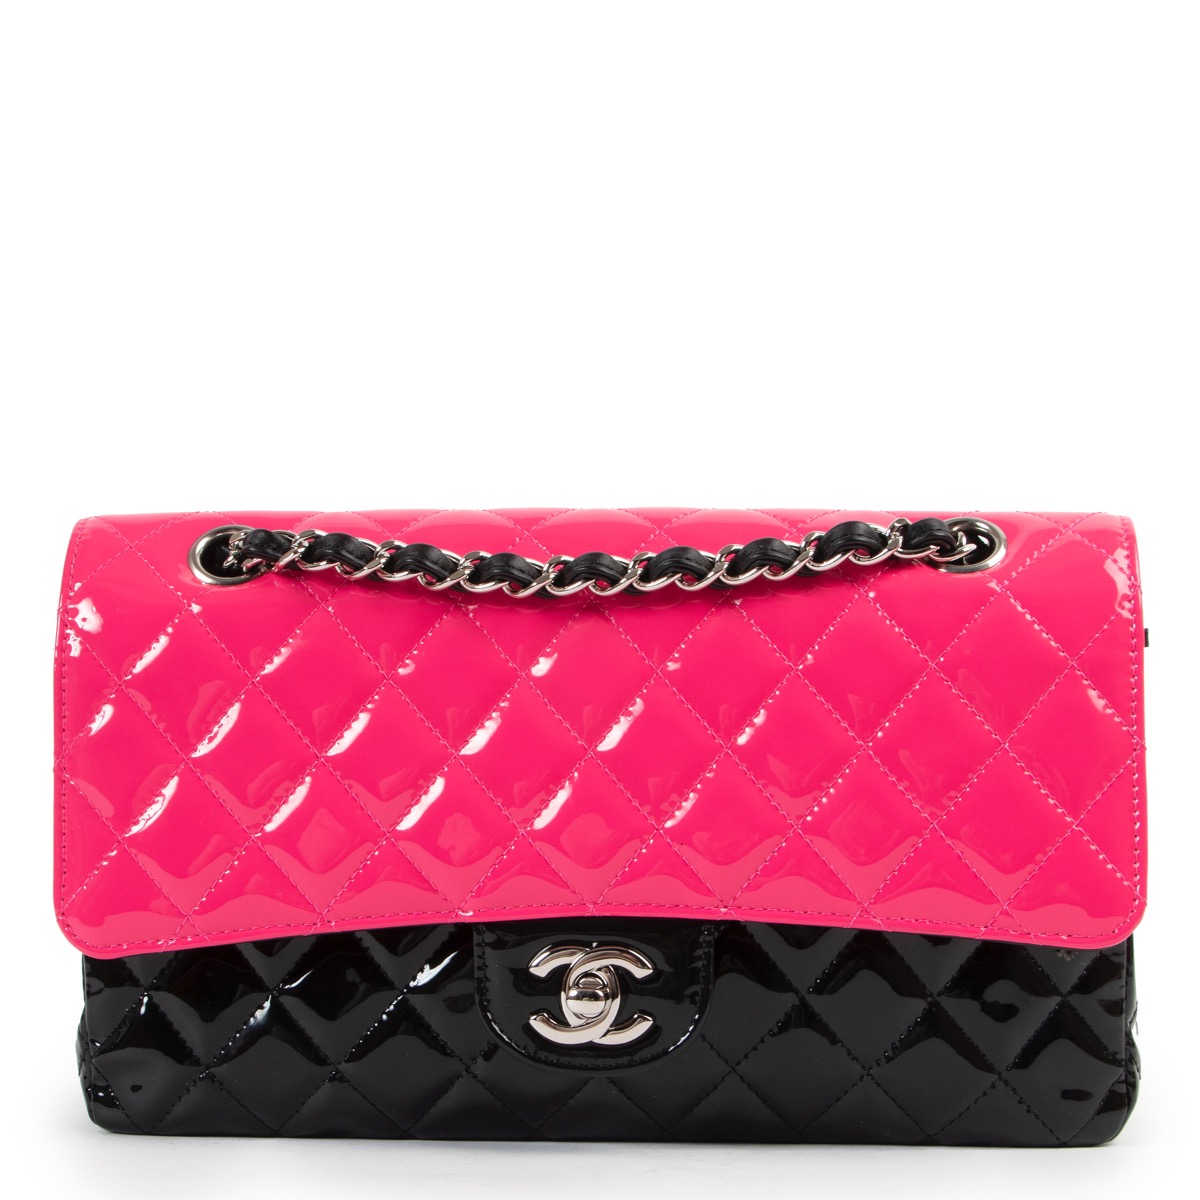 Chanel Classic Double Flap Bag Medium Tweed Pink Silver Hardware